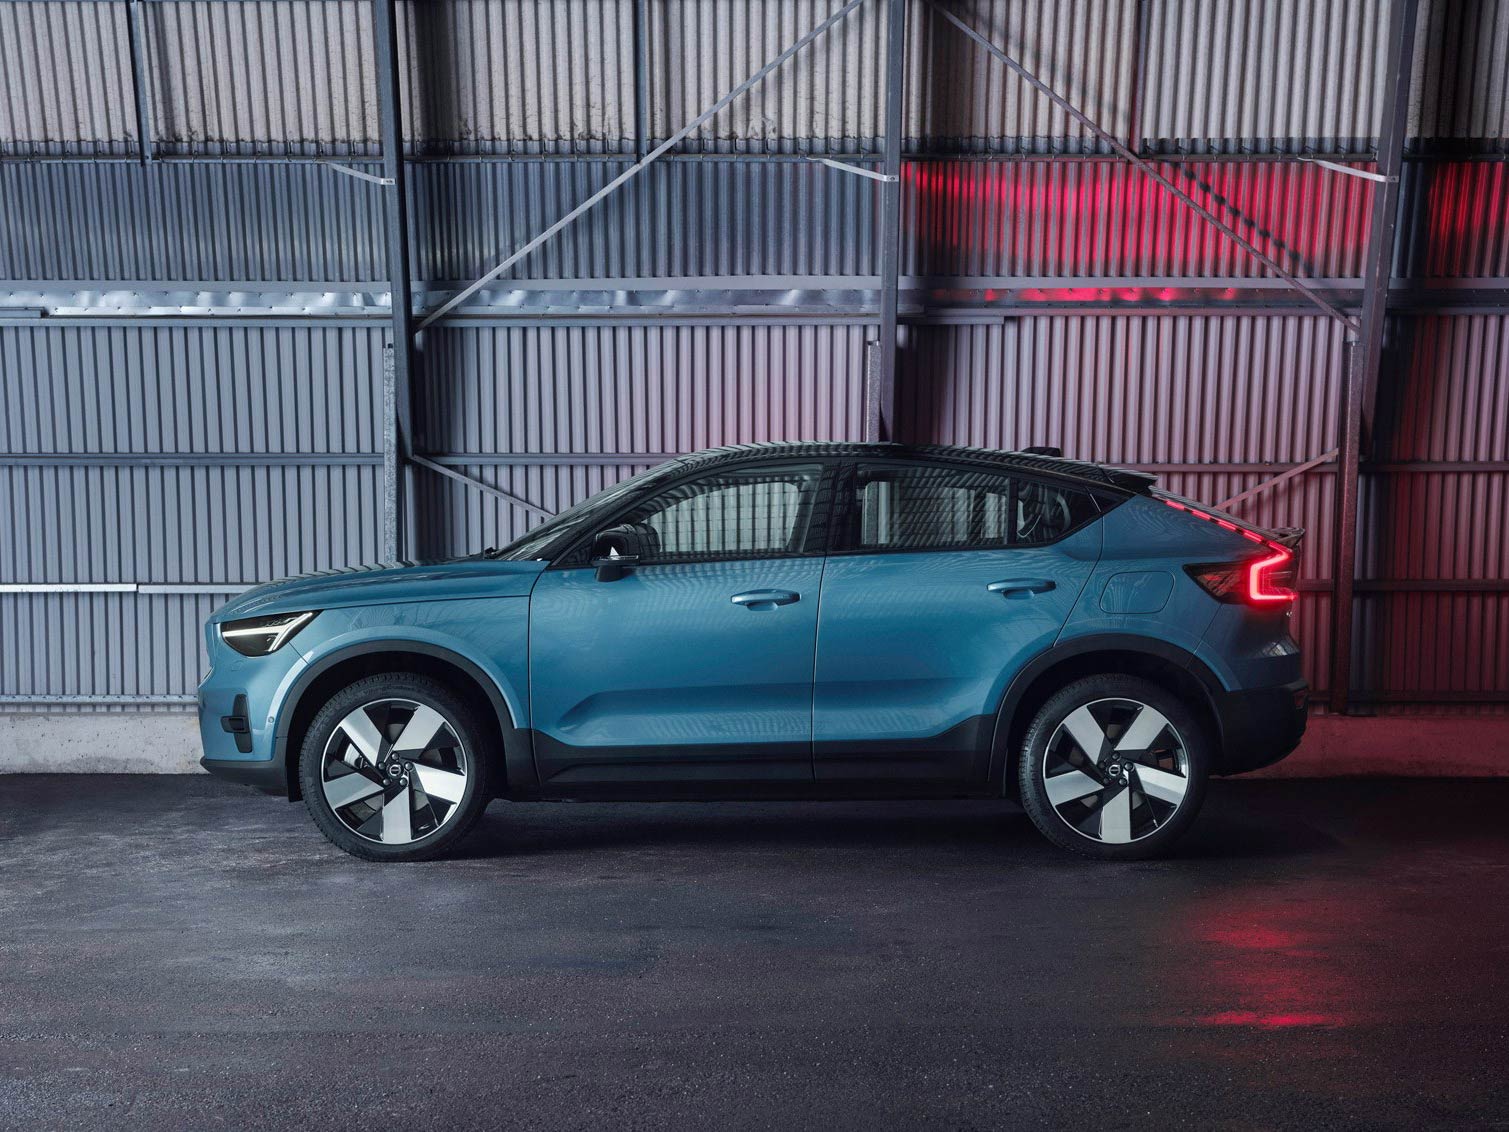 Volvo Details Big Plans to Improve Batteries, Infotainment, and Safety